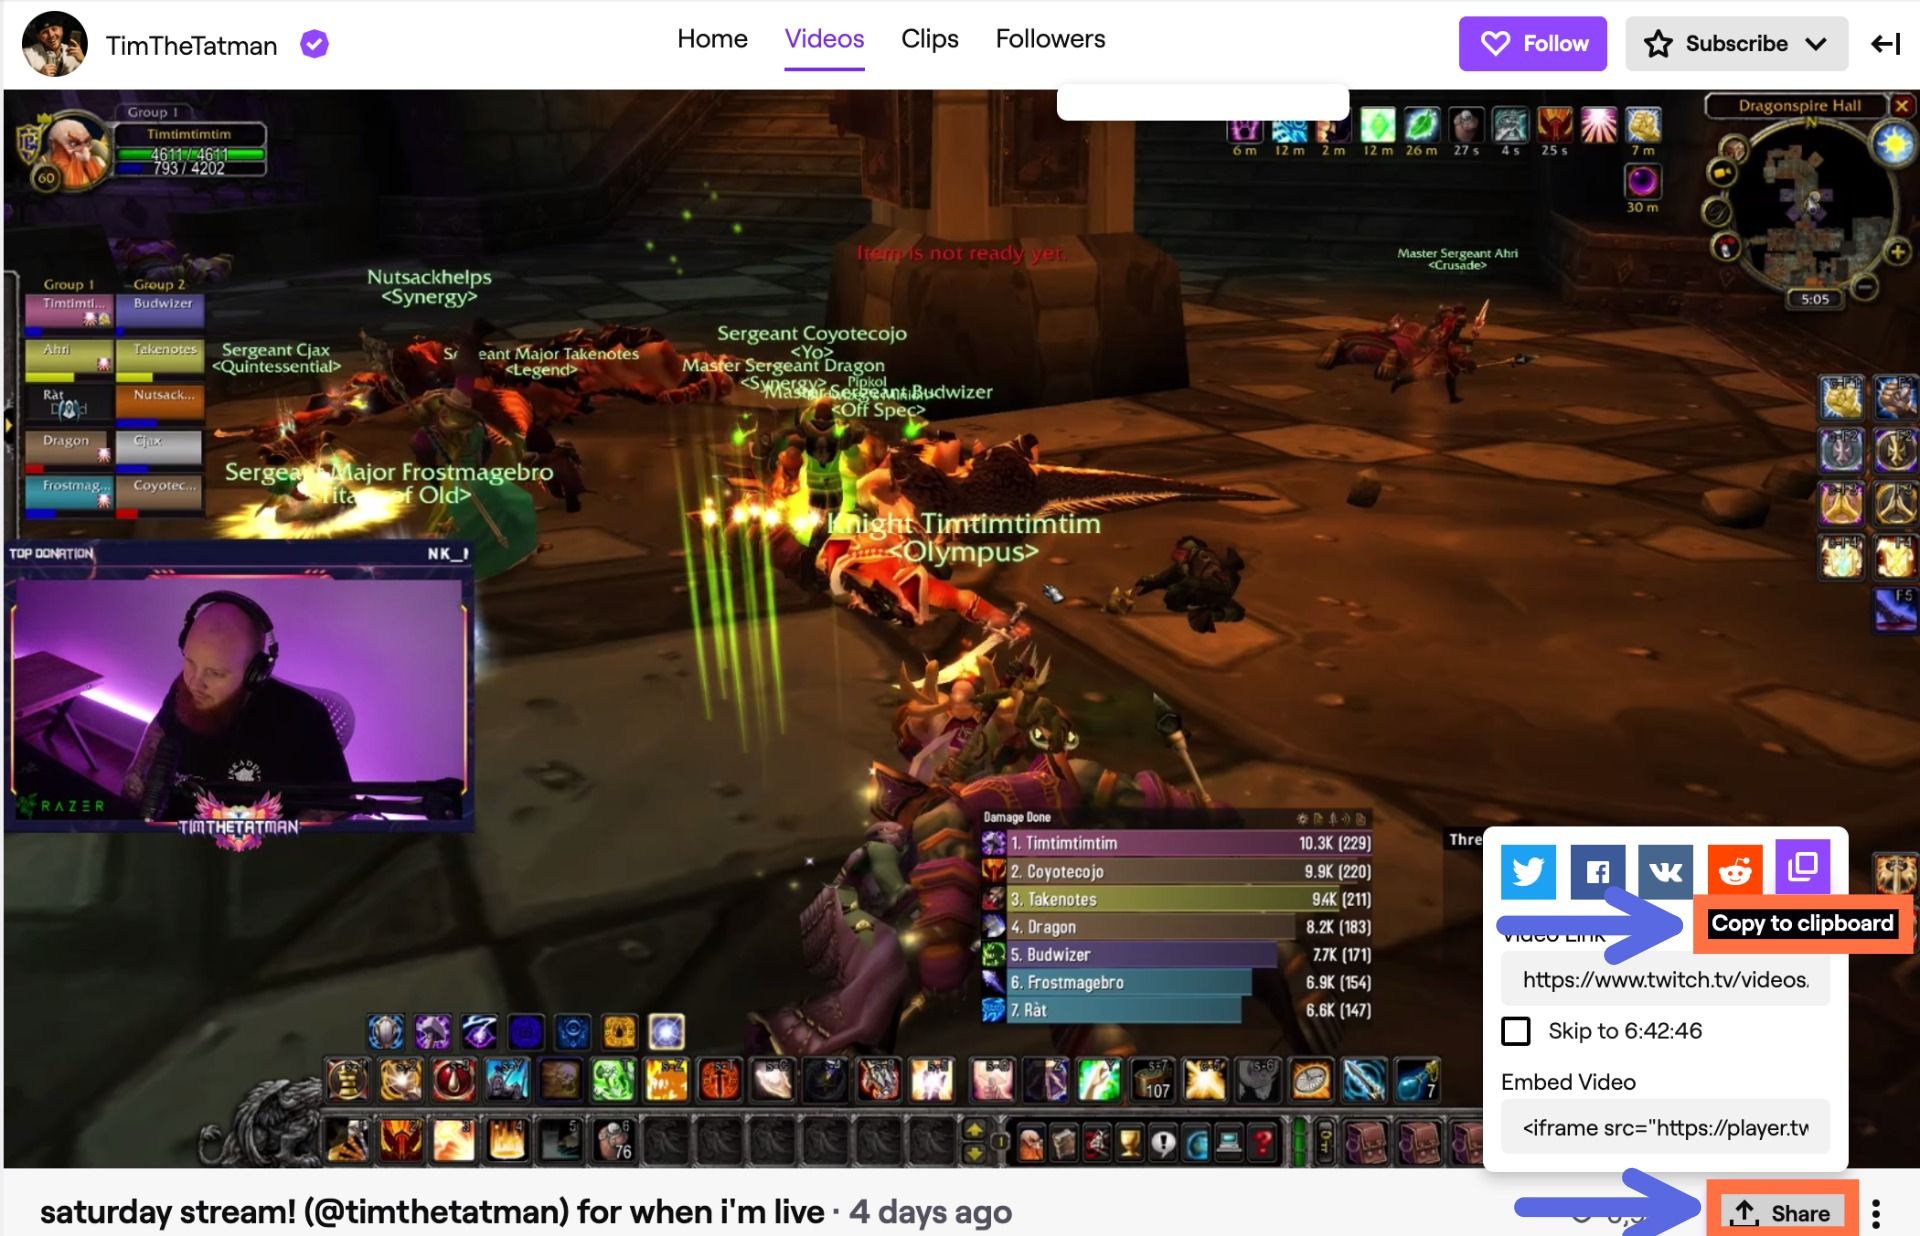 How To Share A Twitch Stream On Social Media